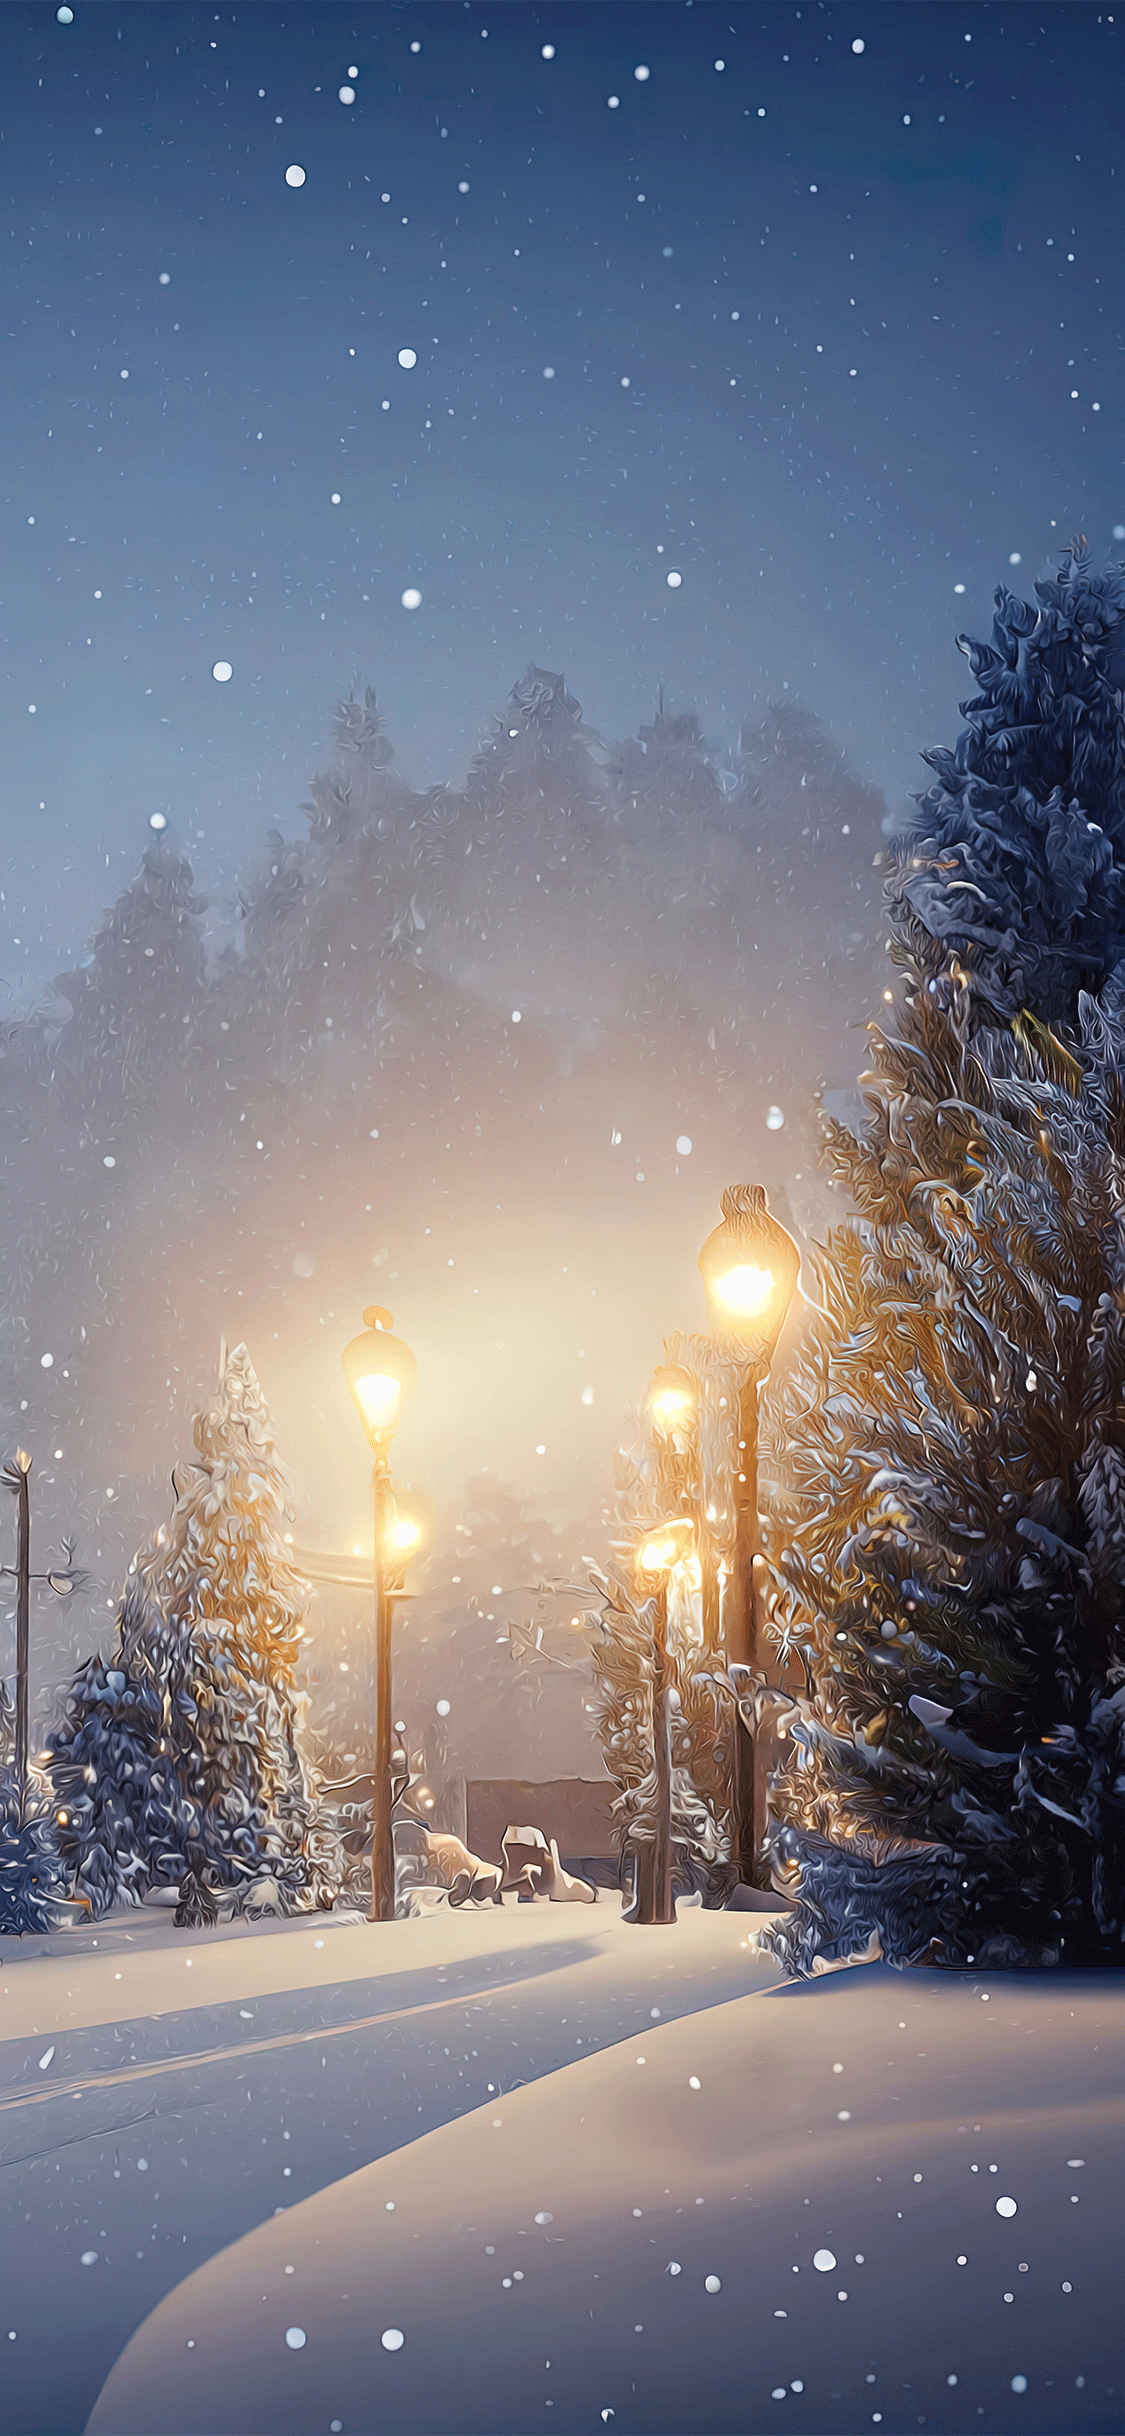 20+ Cozy winter wallpapers for iPhone (Free 4K download) - iGeeksBlog